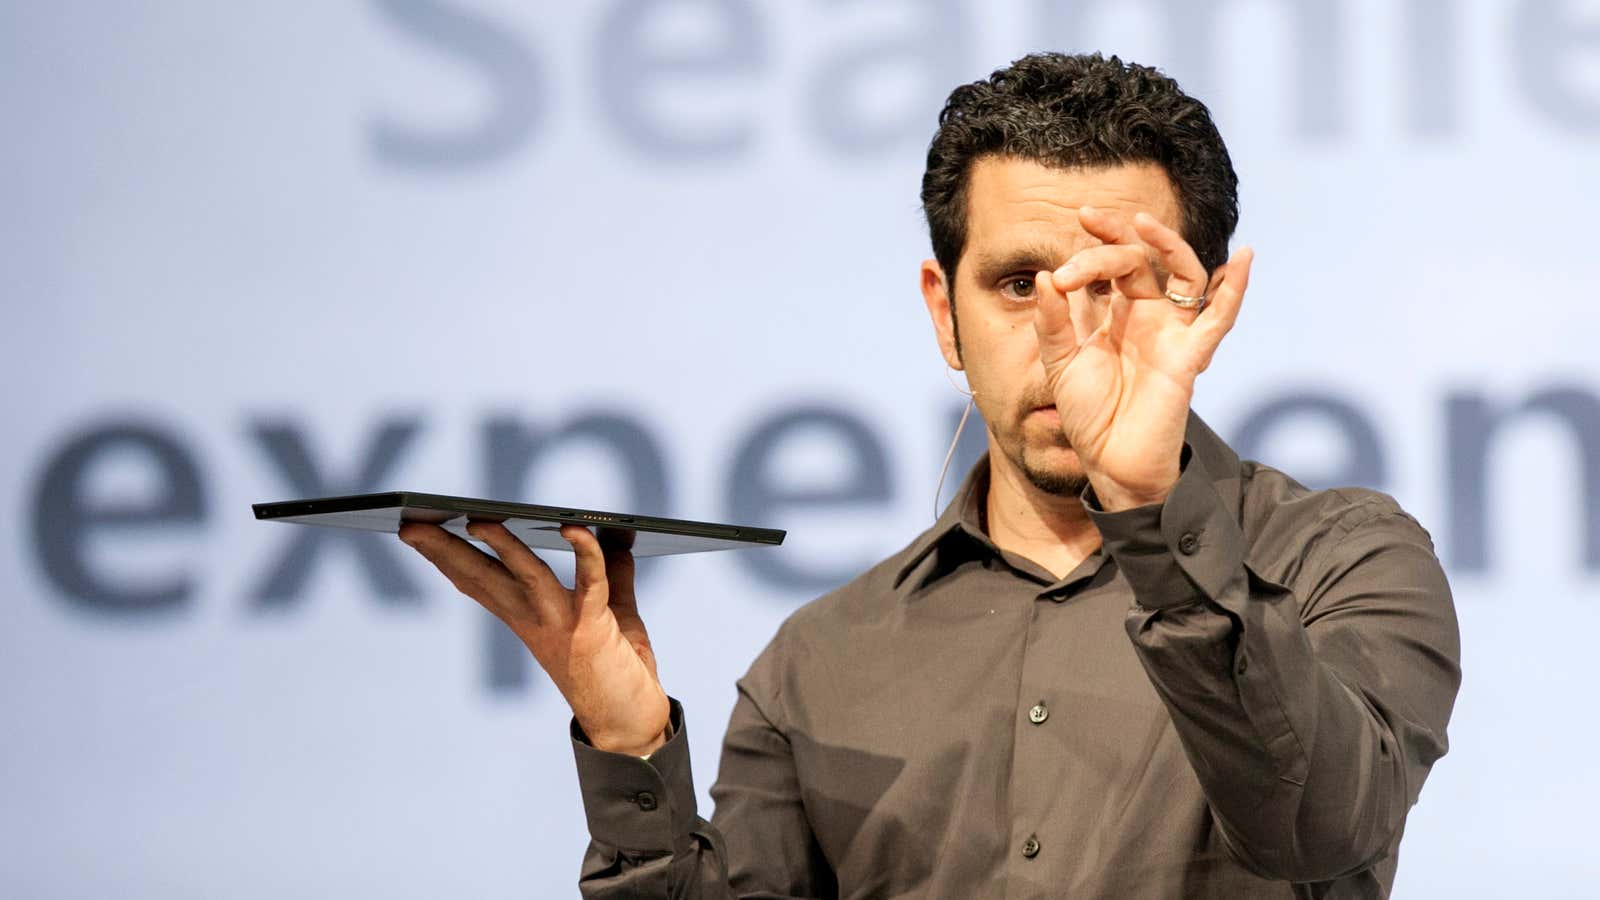 Panos Panay, head of Microsoft’s Surface division, shows how little storage is left on the Surface Pro once Microsoft is done filling it with bloatware.